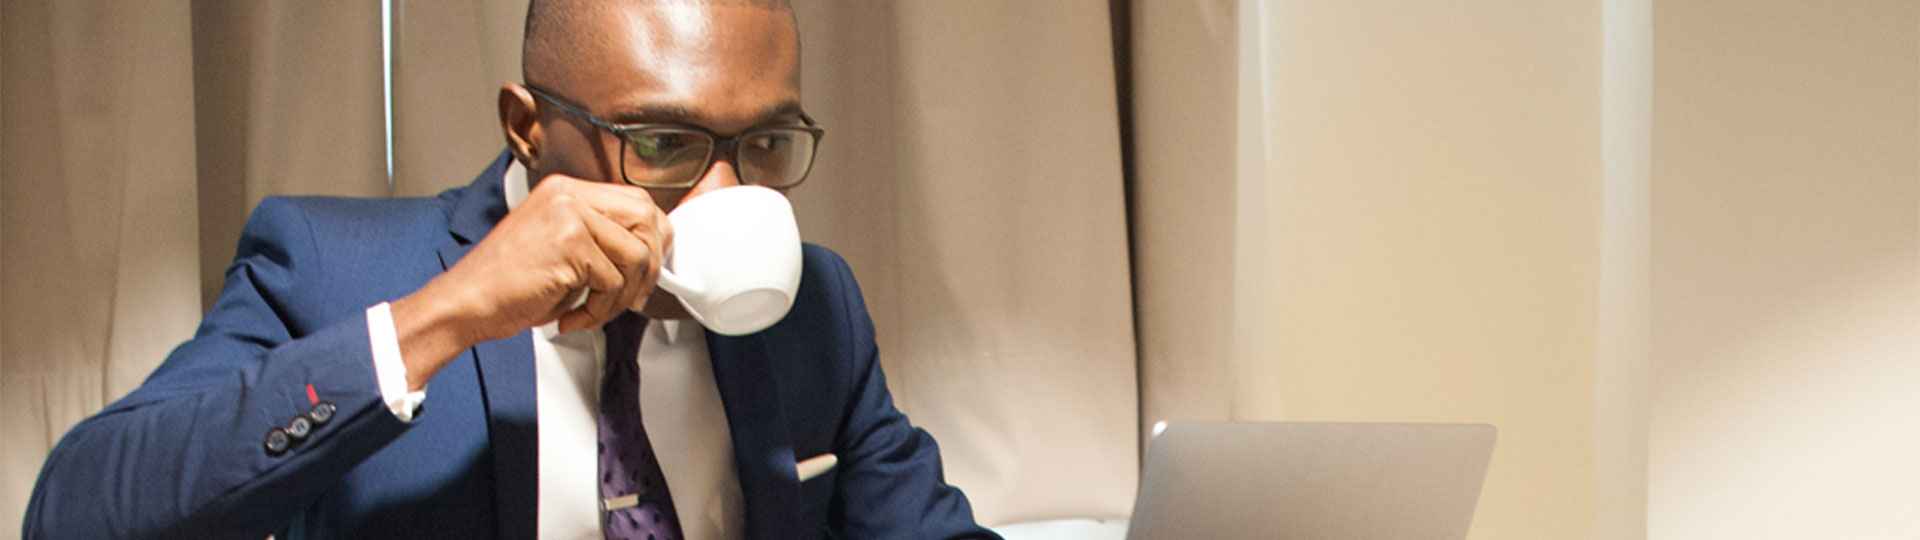 Man wearing a suit and working on a laptop drinks coffee